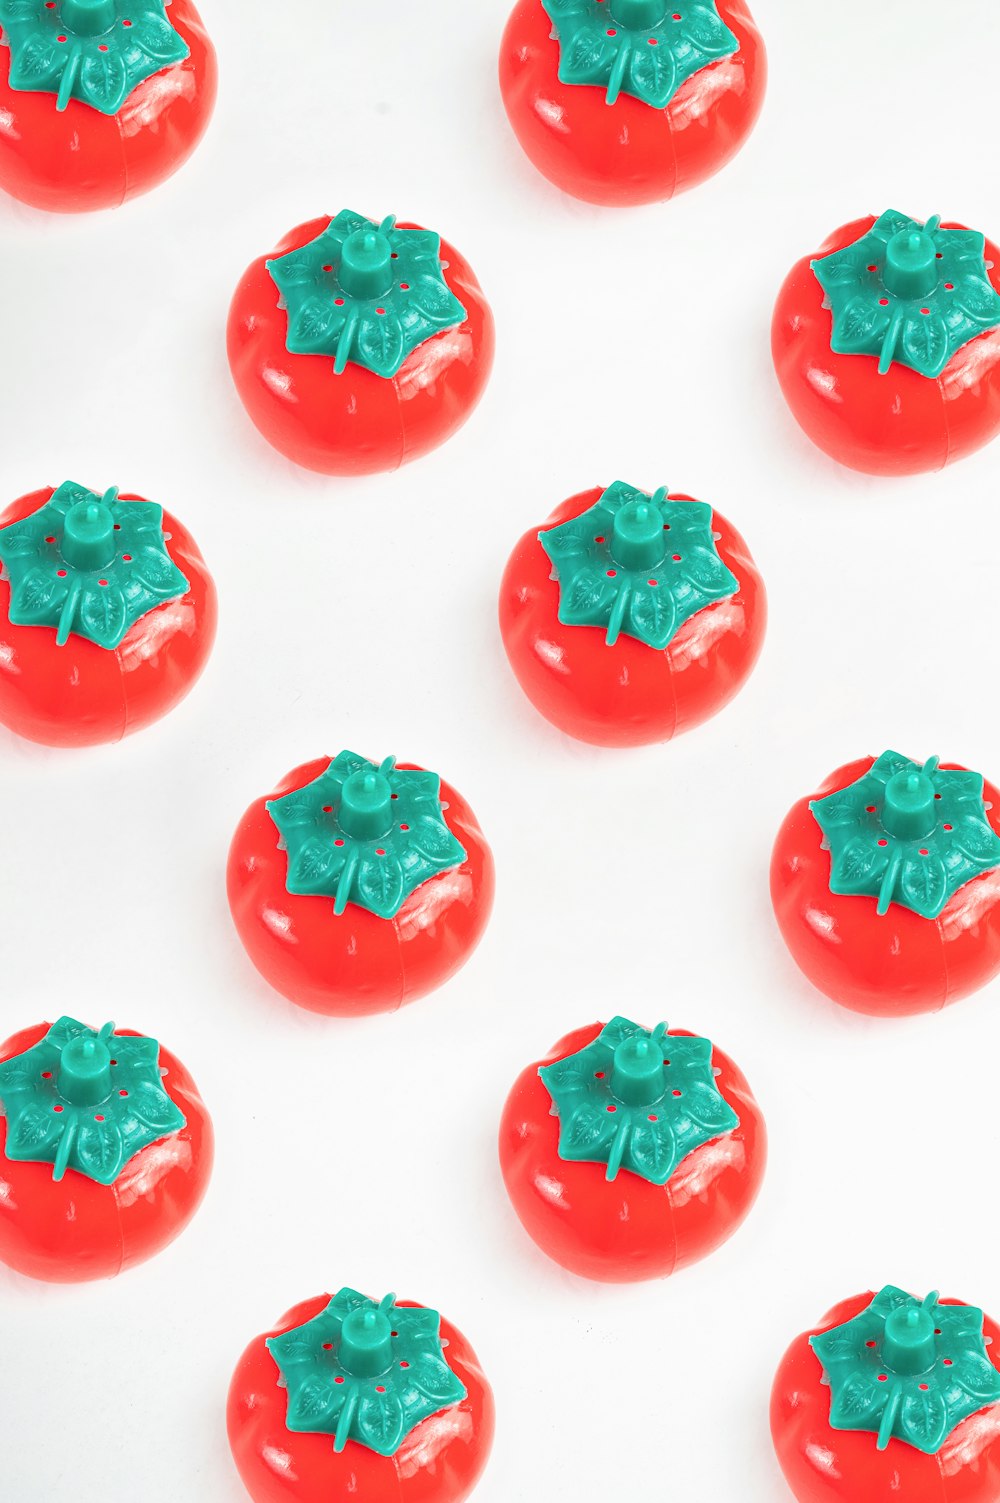 a group of red and green buttons on a white surface